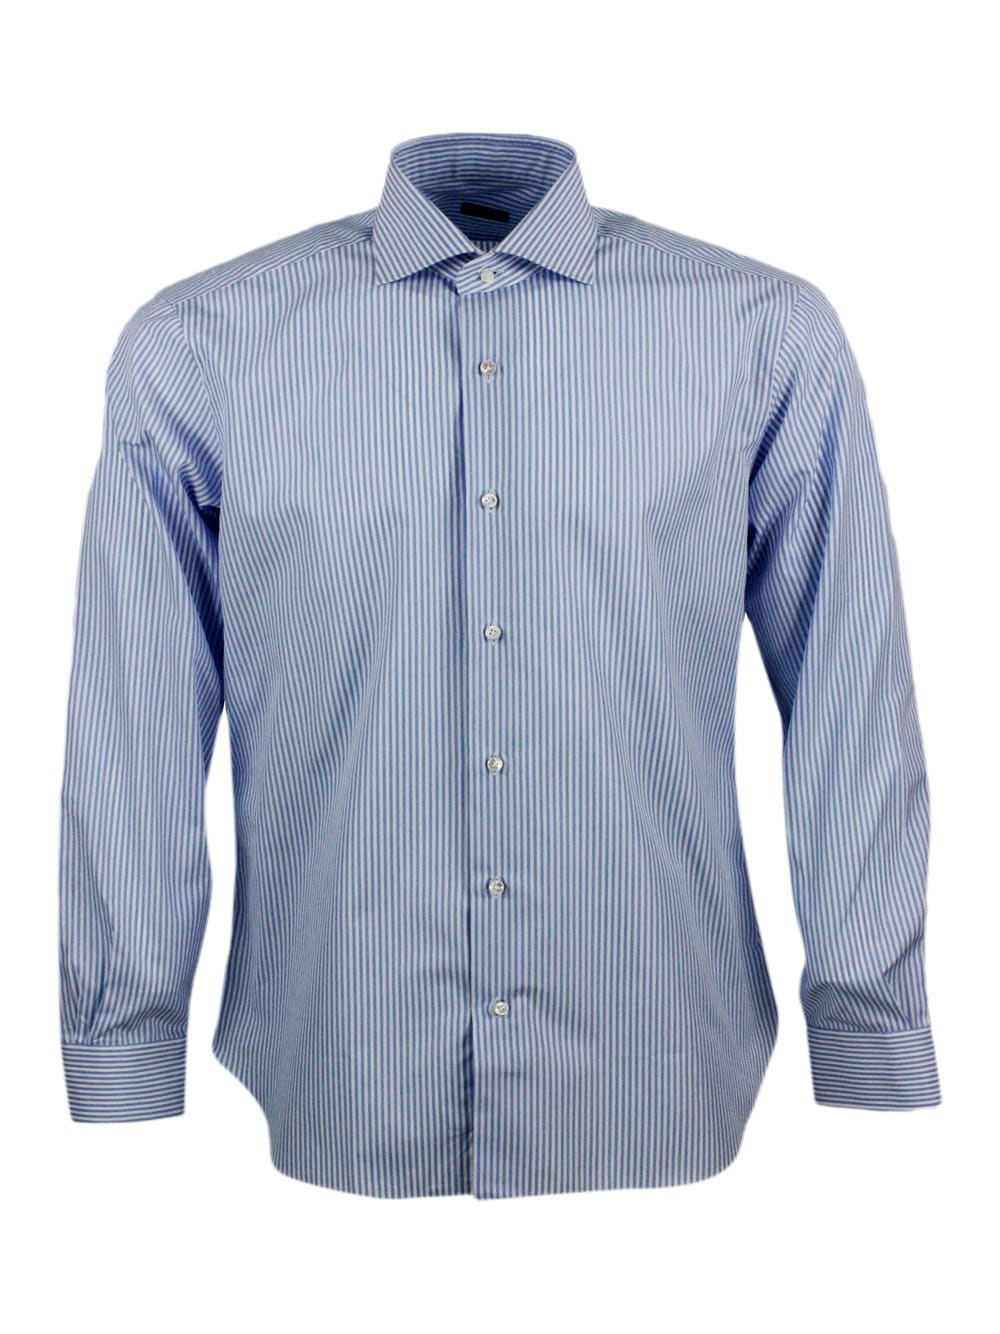 Slim Fit Loose-fit Shirt In Fine Stretch Cotton, Italian Collar, Hand-stitched Black Label And Mother-of-pearl Buttons